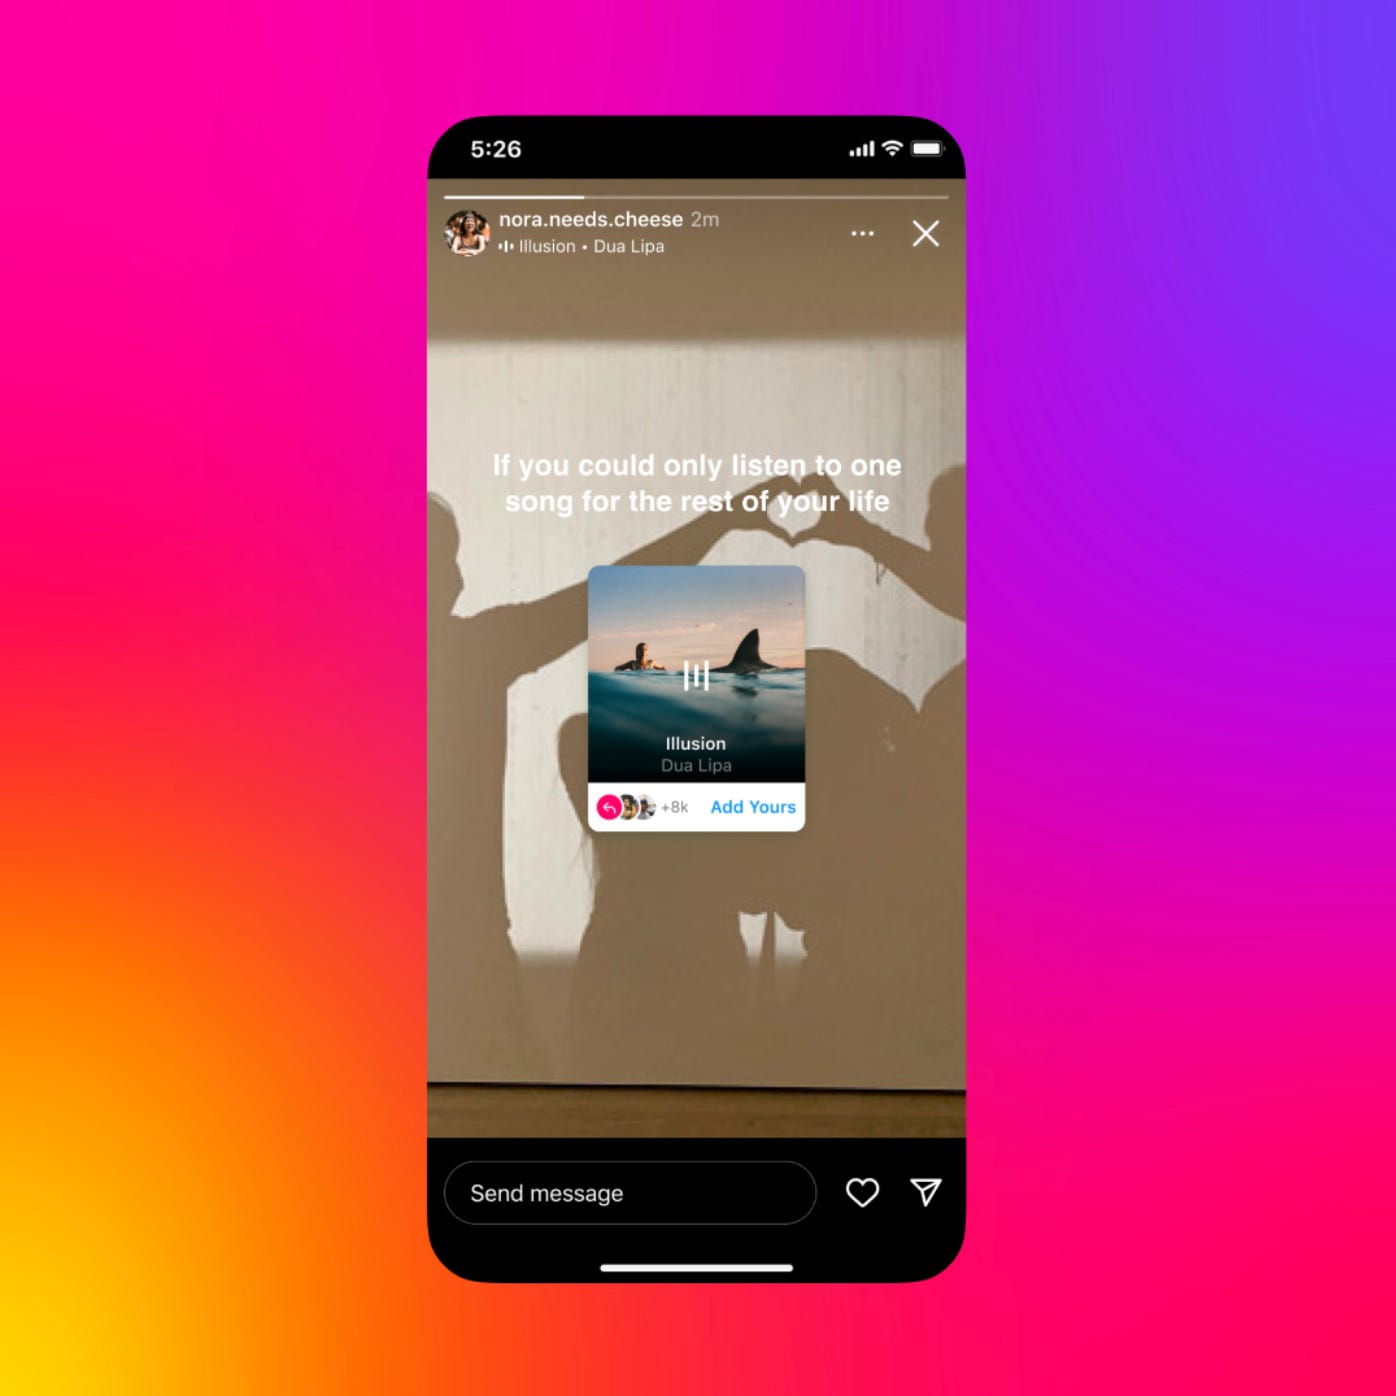 Mobile screen showing Instagram feature. Copy reads: If you could only listen to one song for the rest of your life. The sticker chosen for Add Yours Music is Illusion by Dua Lipa